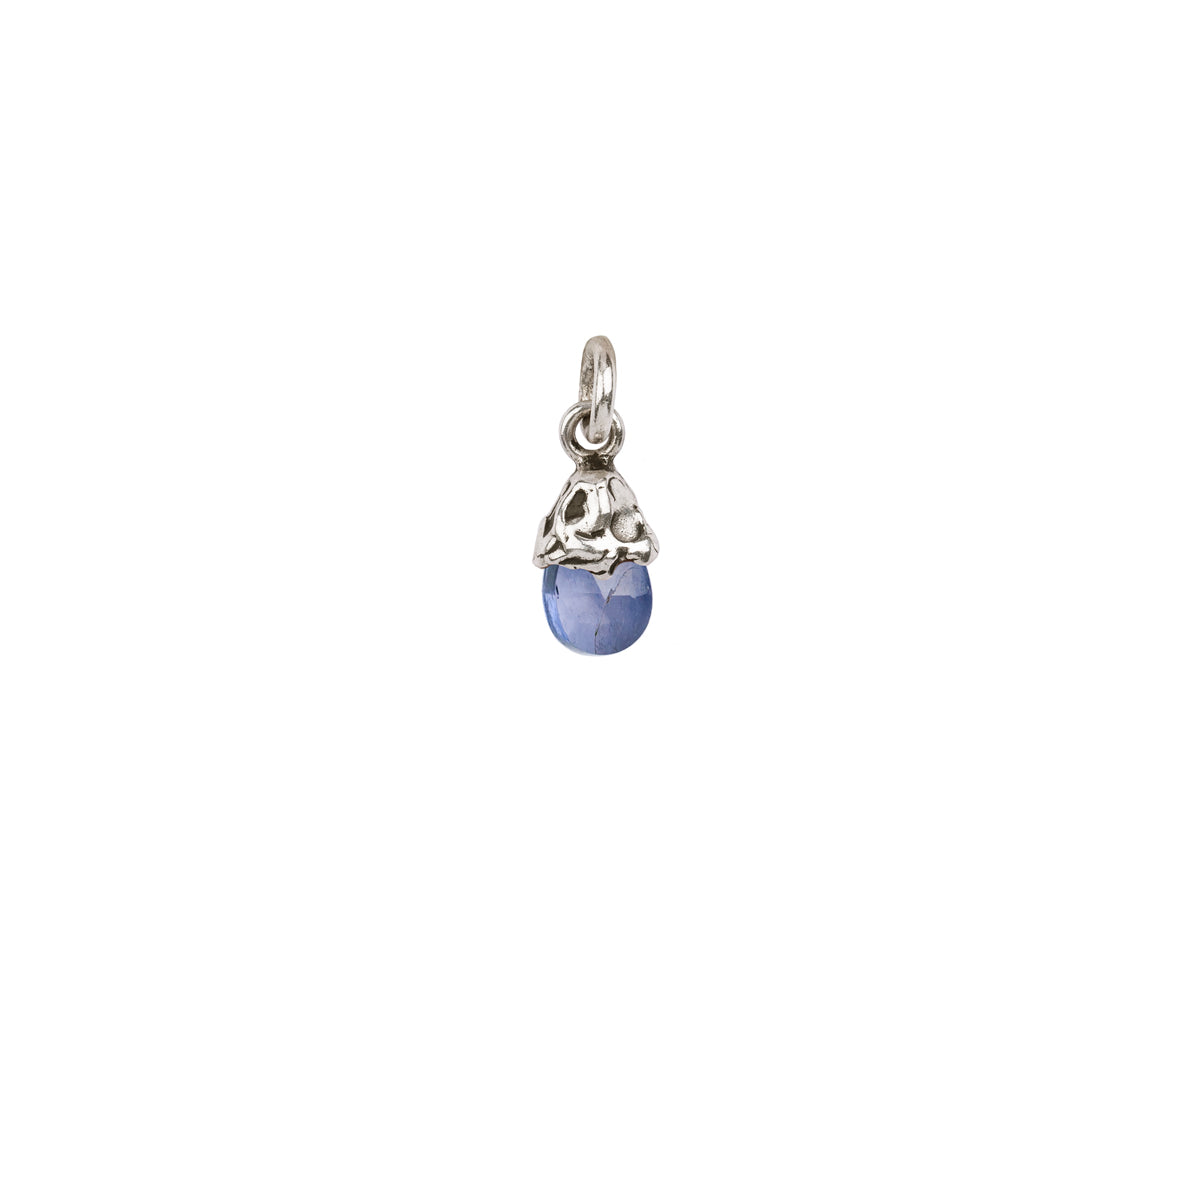 A sterling silver attraction charm capped with a Lolite stone.